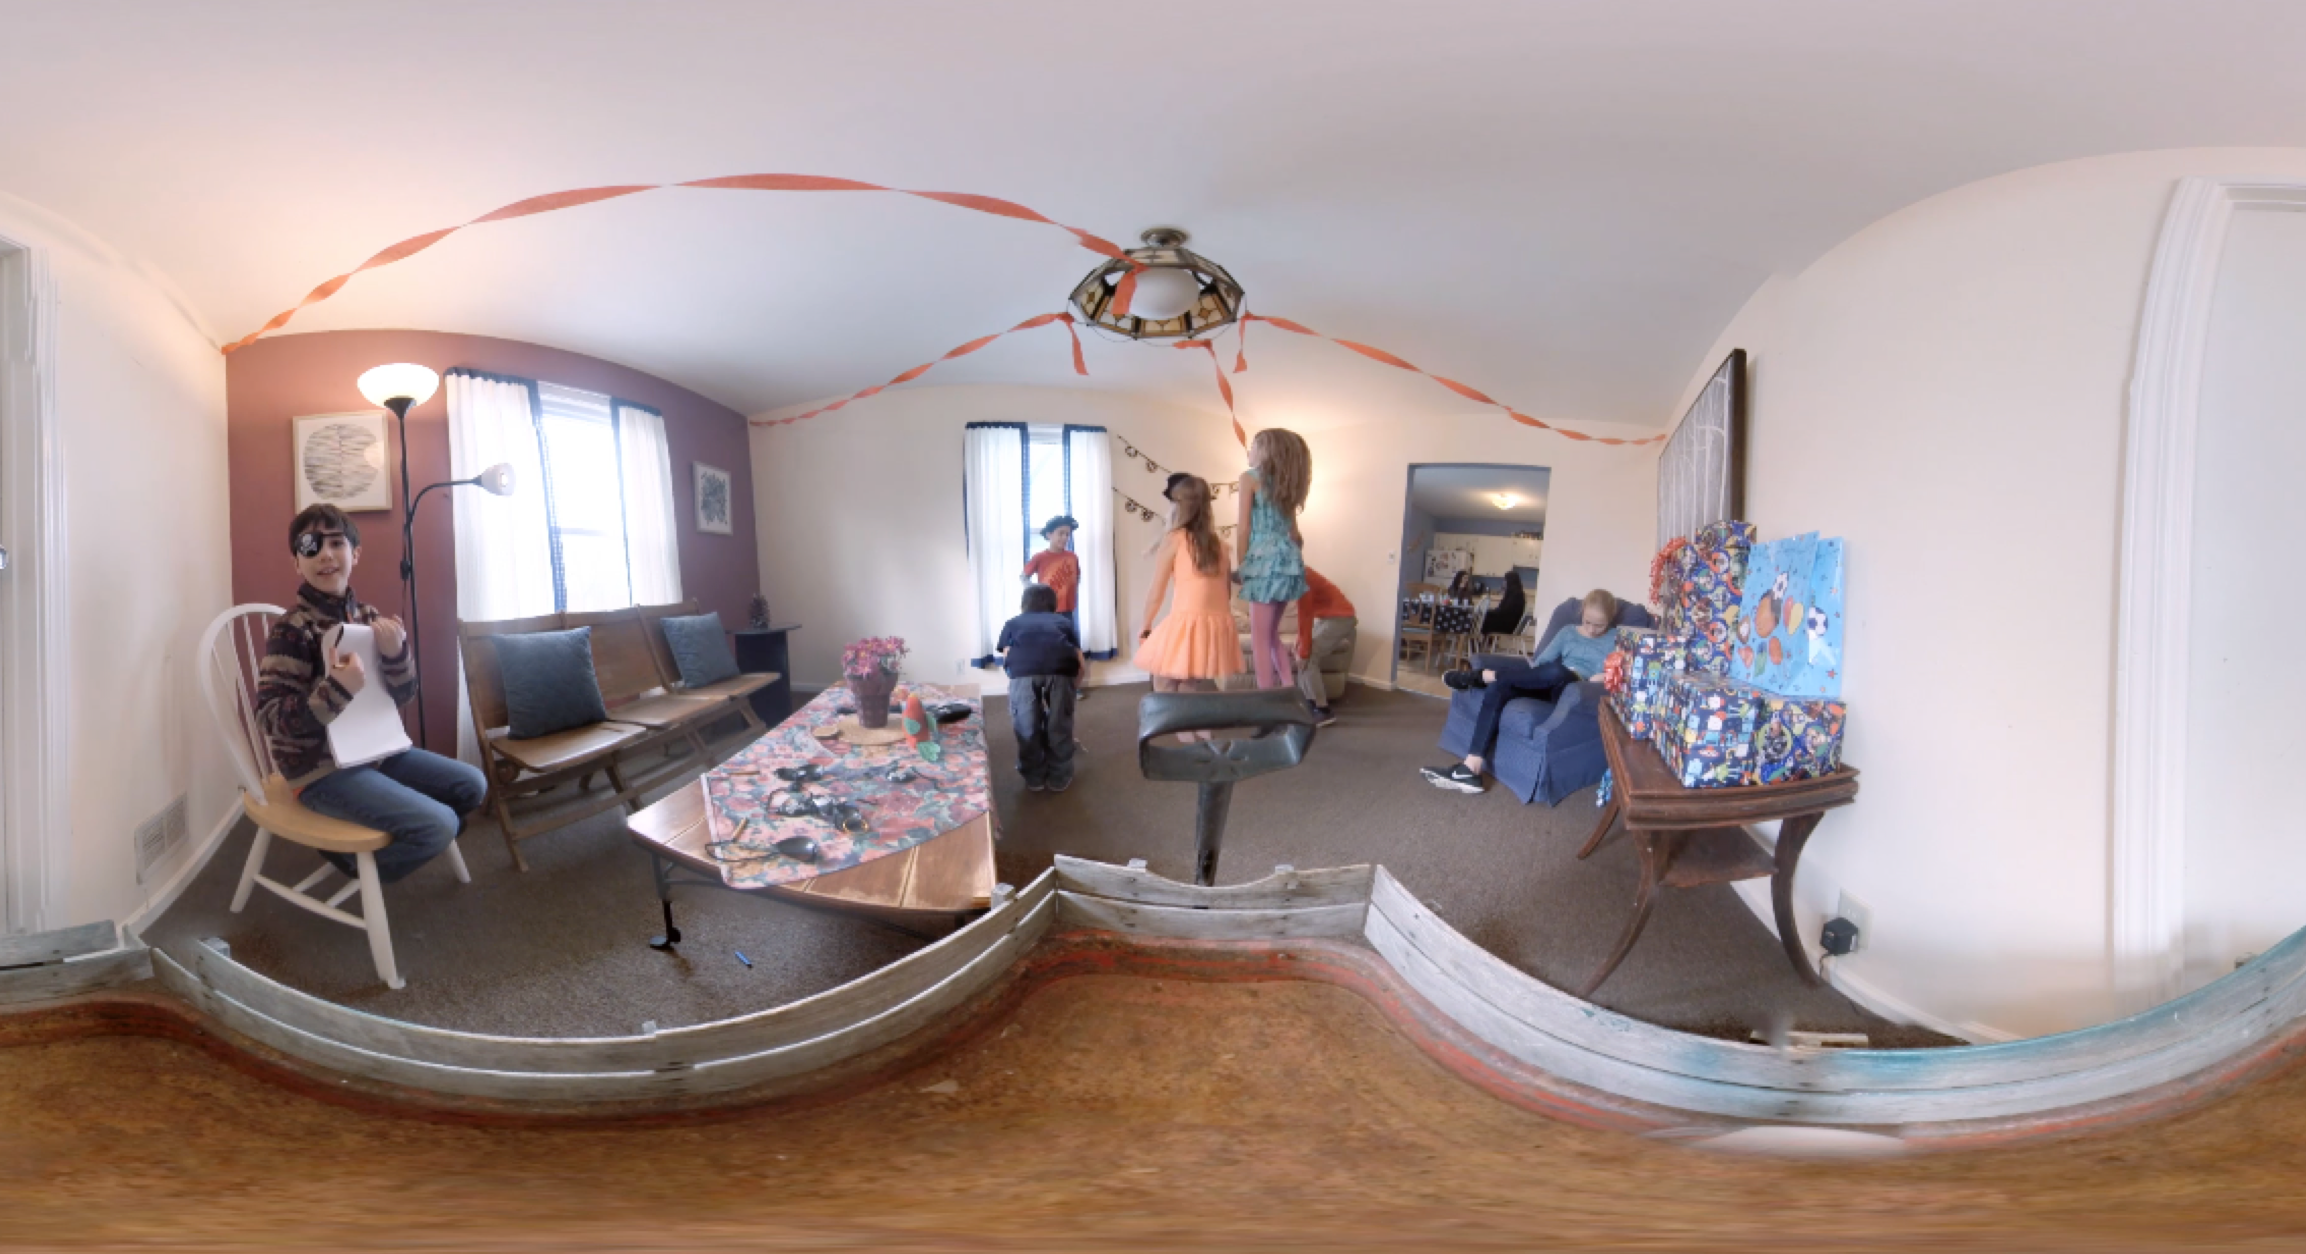 A panoramic photo of a room with children playing.